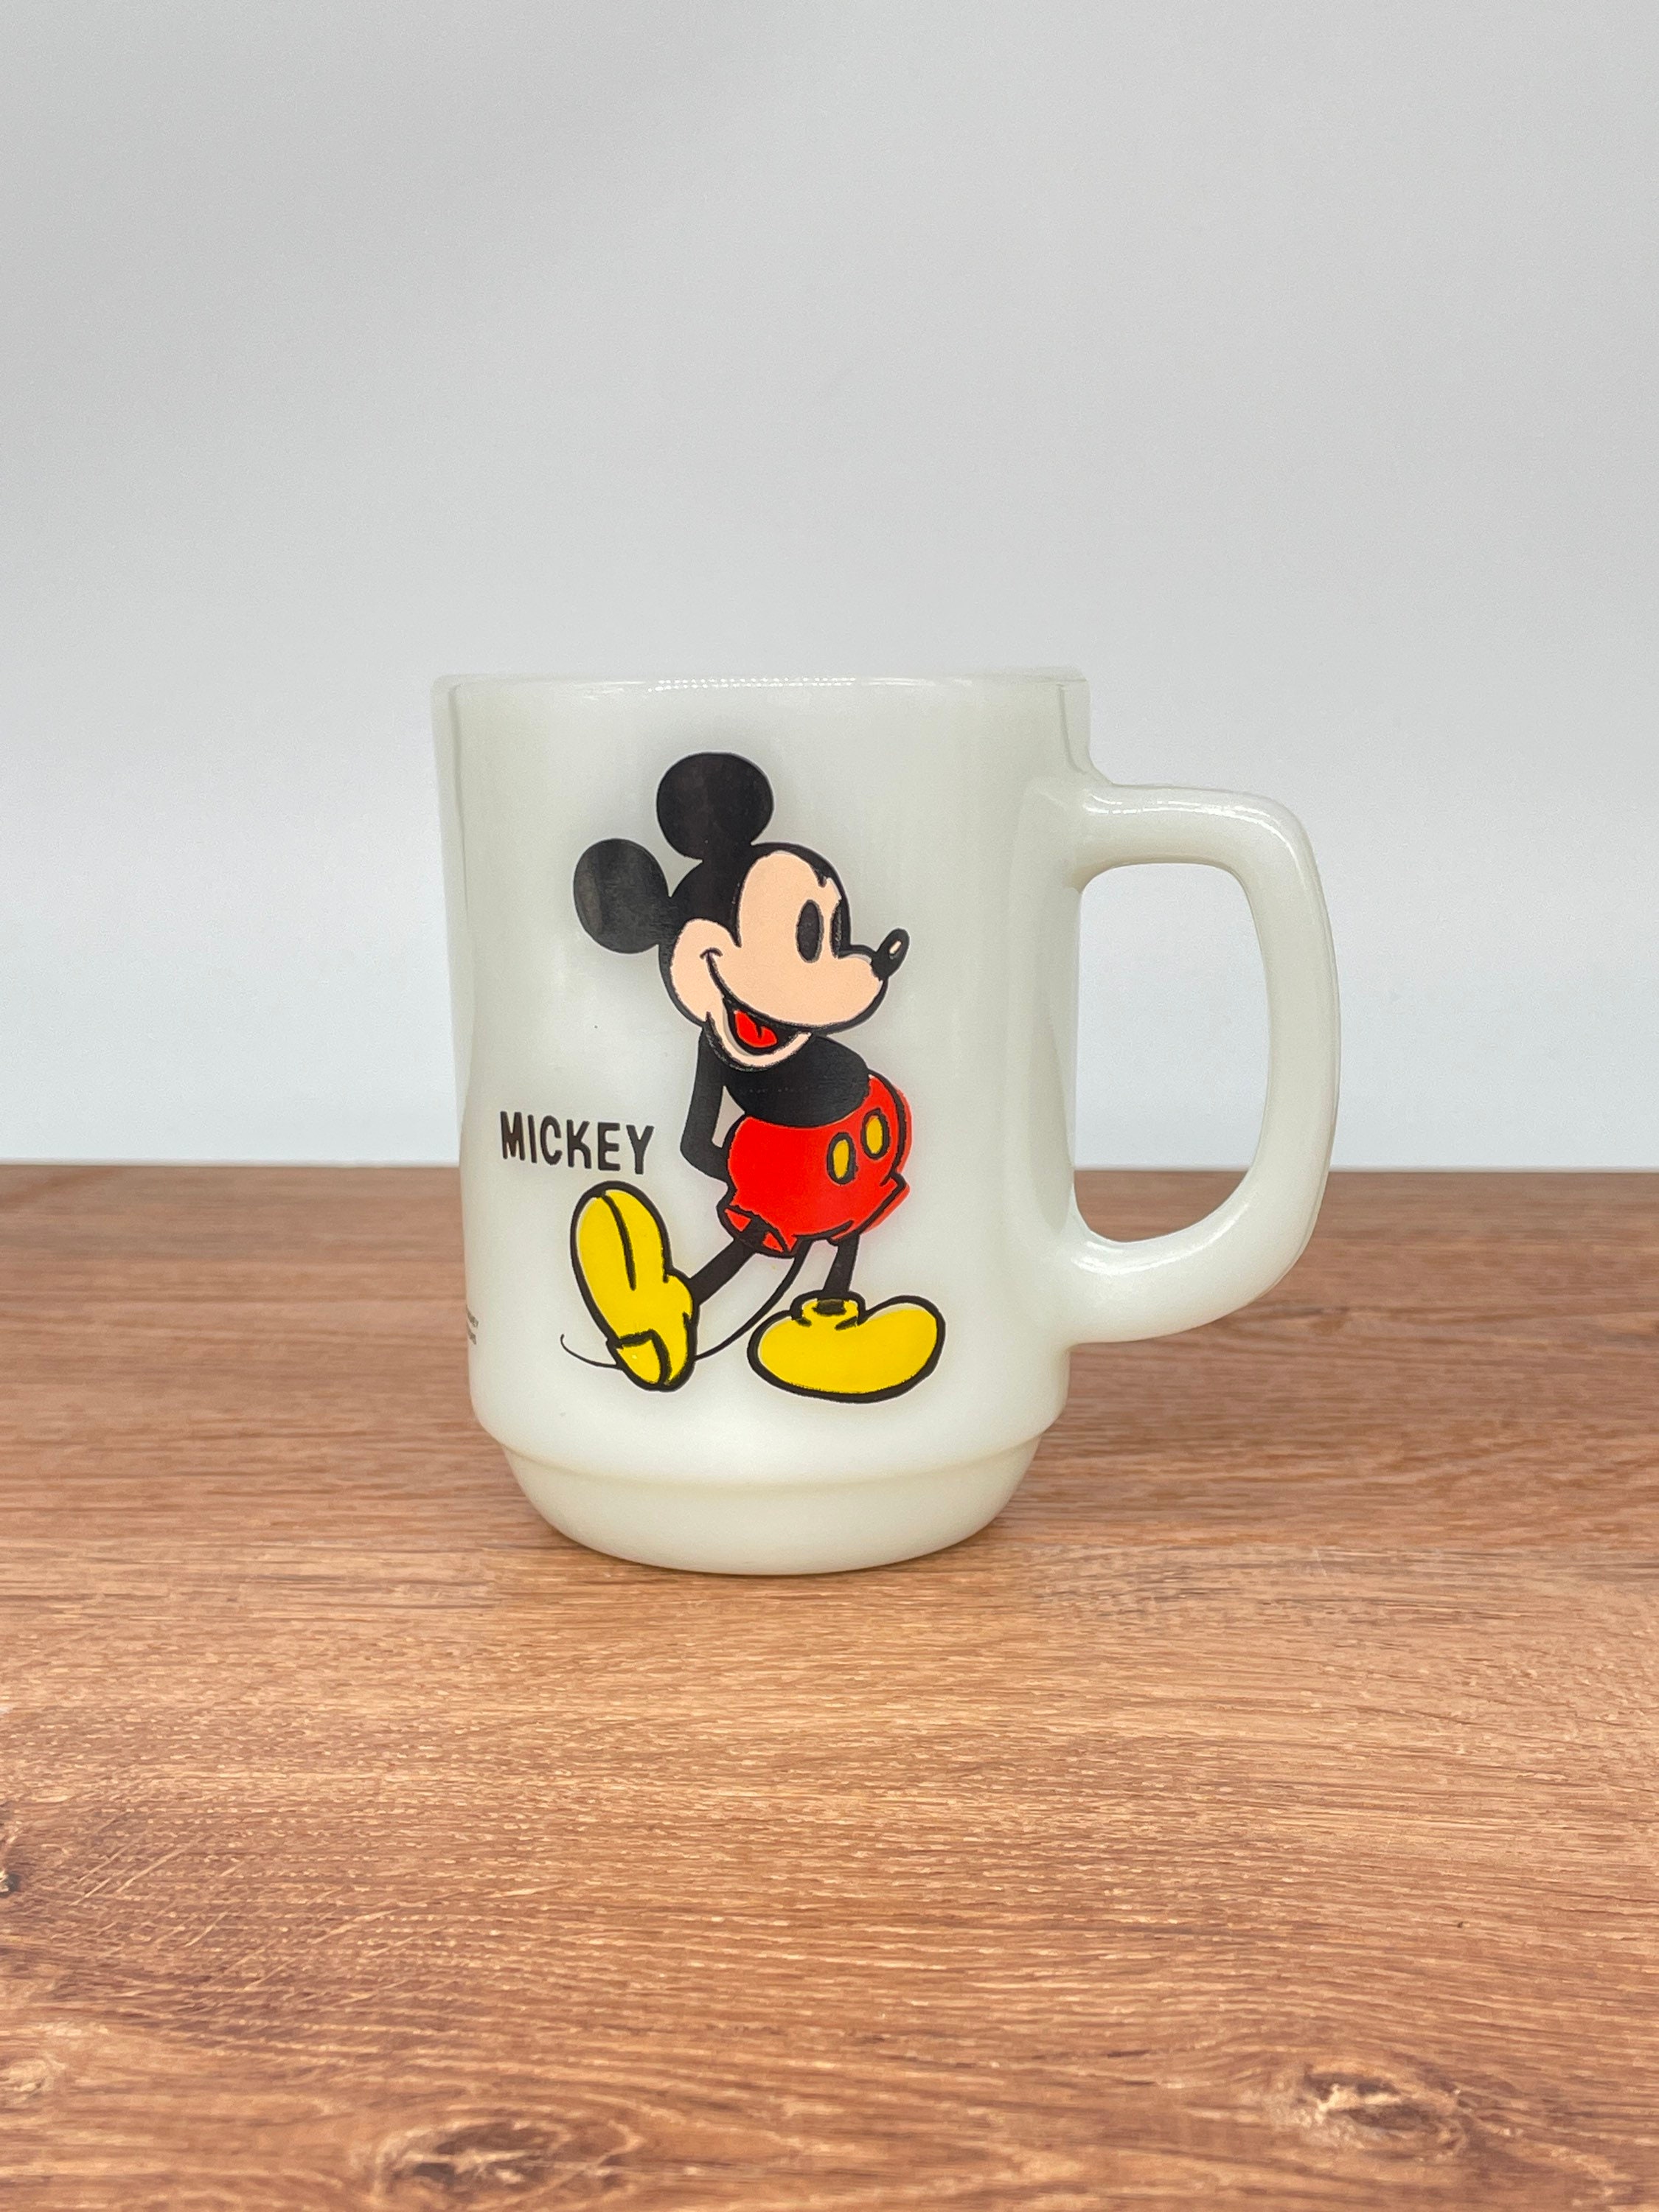 Vaso Cafe Termico 425ml Stainless Steel Mickey Mouse Wabro 1202